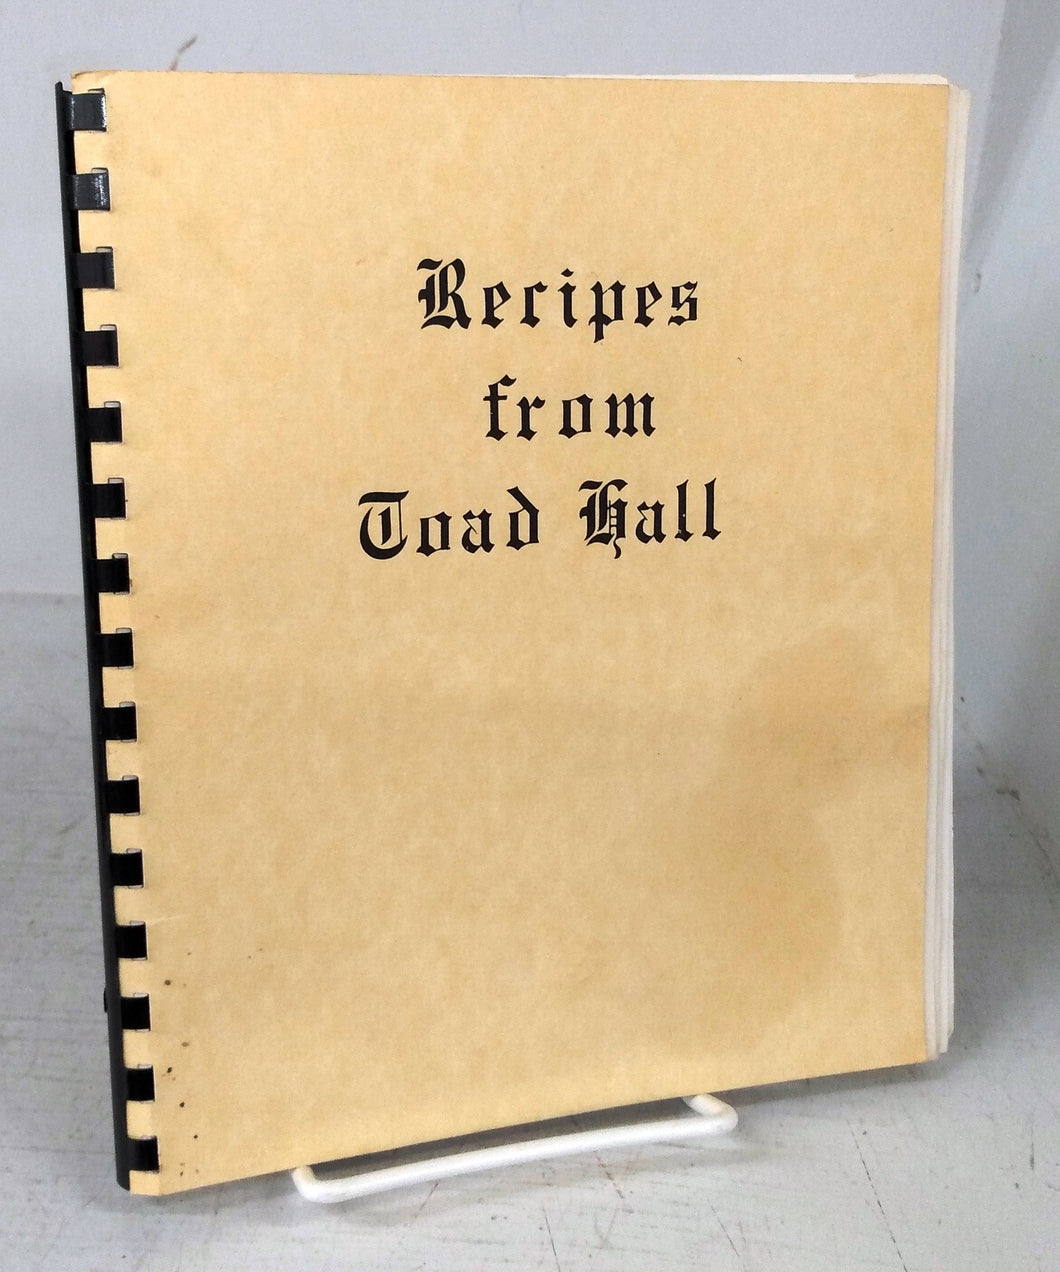 Recipes from Toad Hall